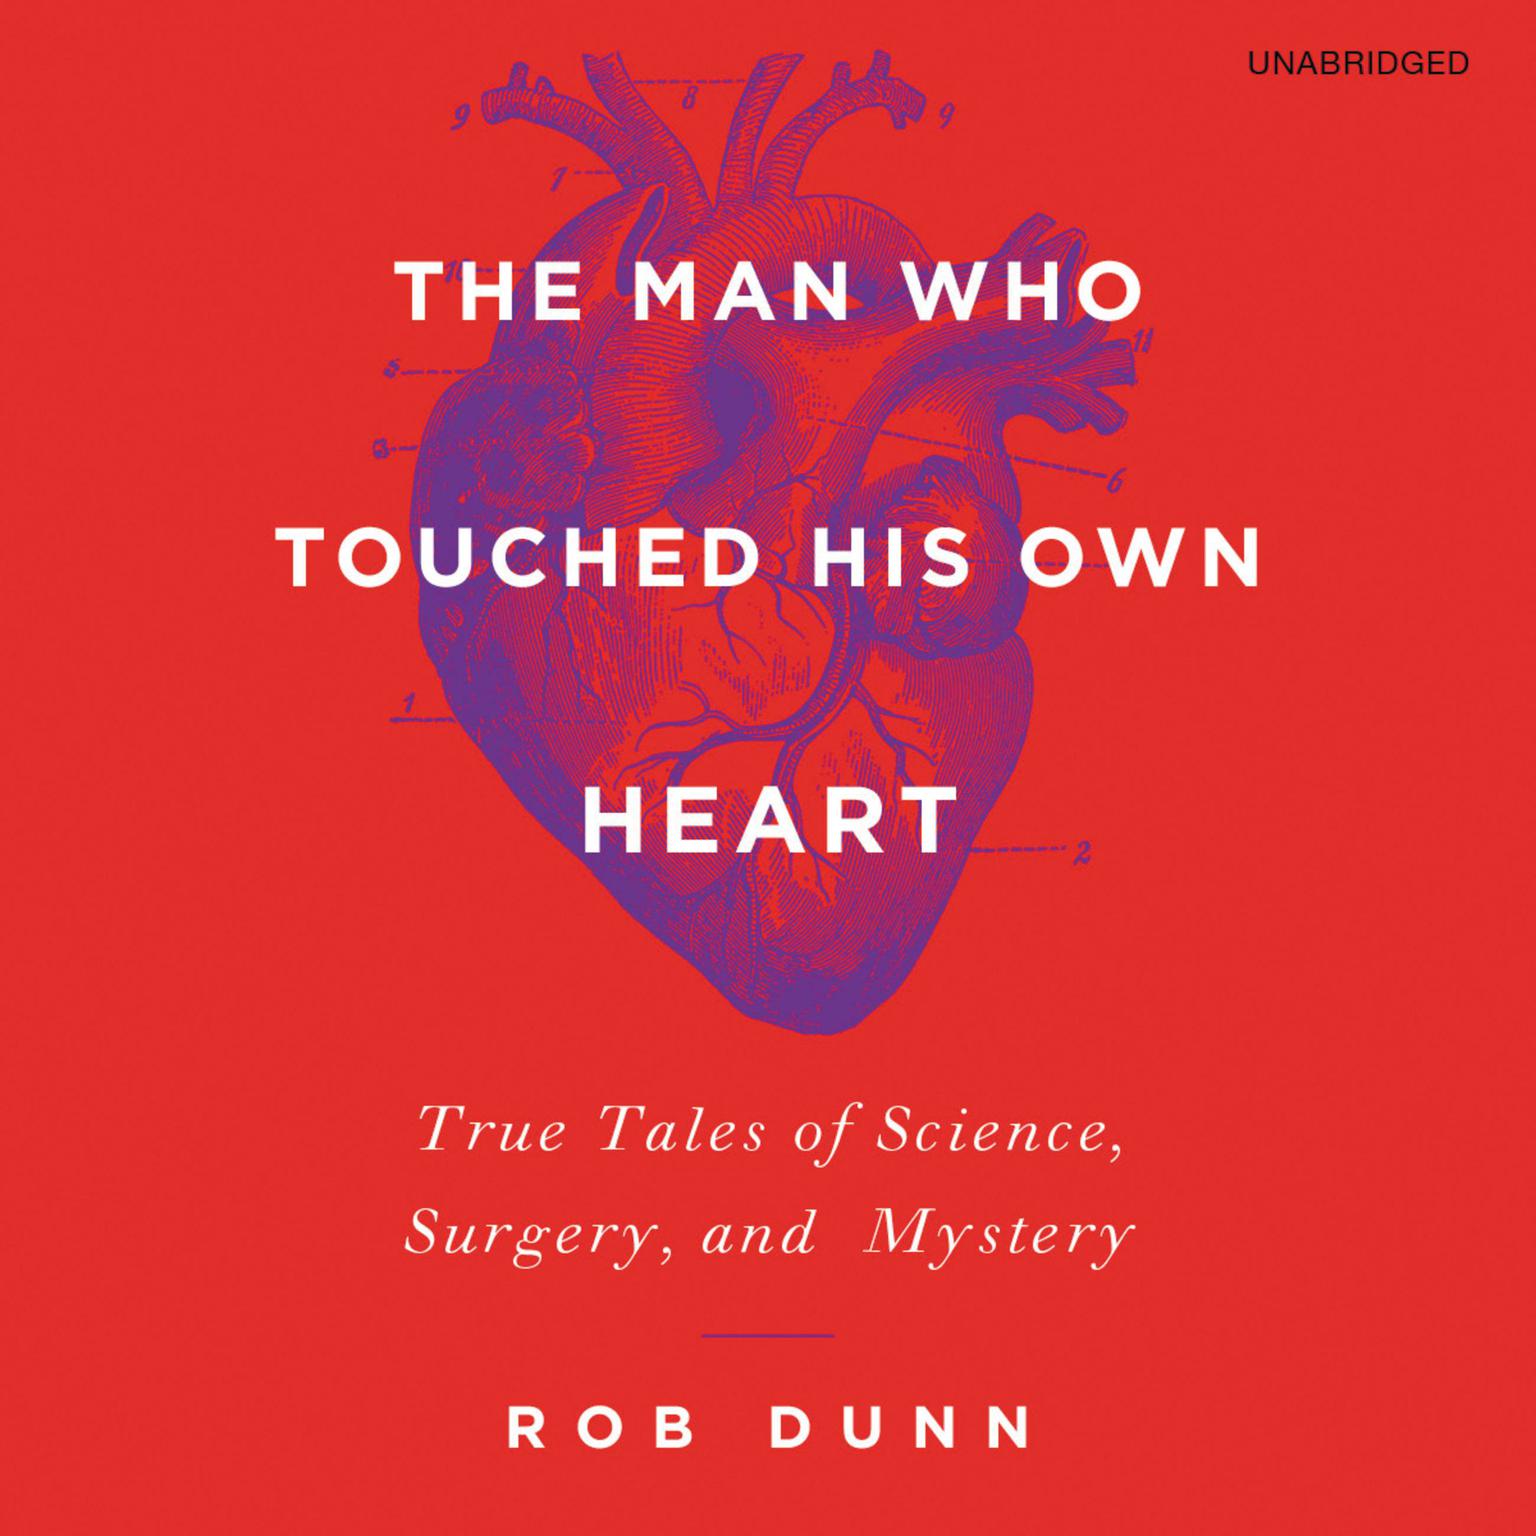 The Man Who Touched His Own Heart: True Tales of Science, Surgery, and Mystery Audiobook, by Rob Dunn